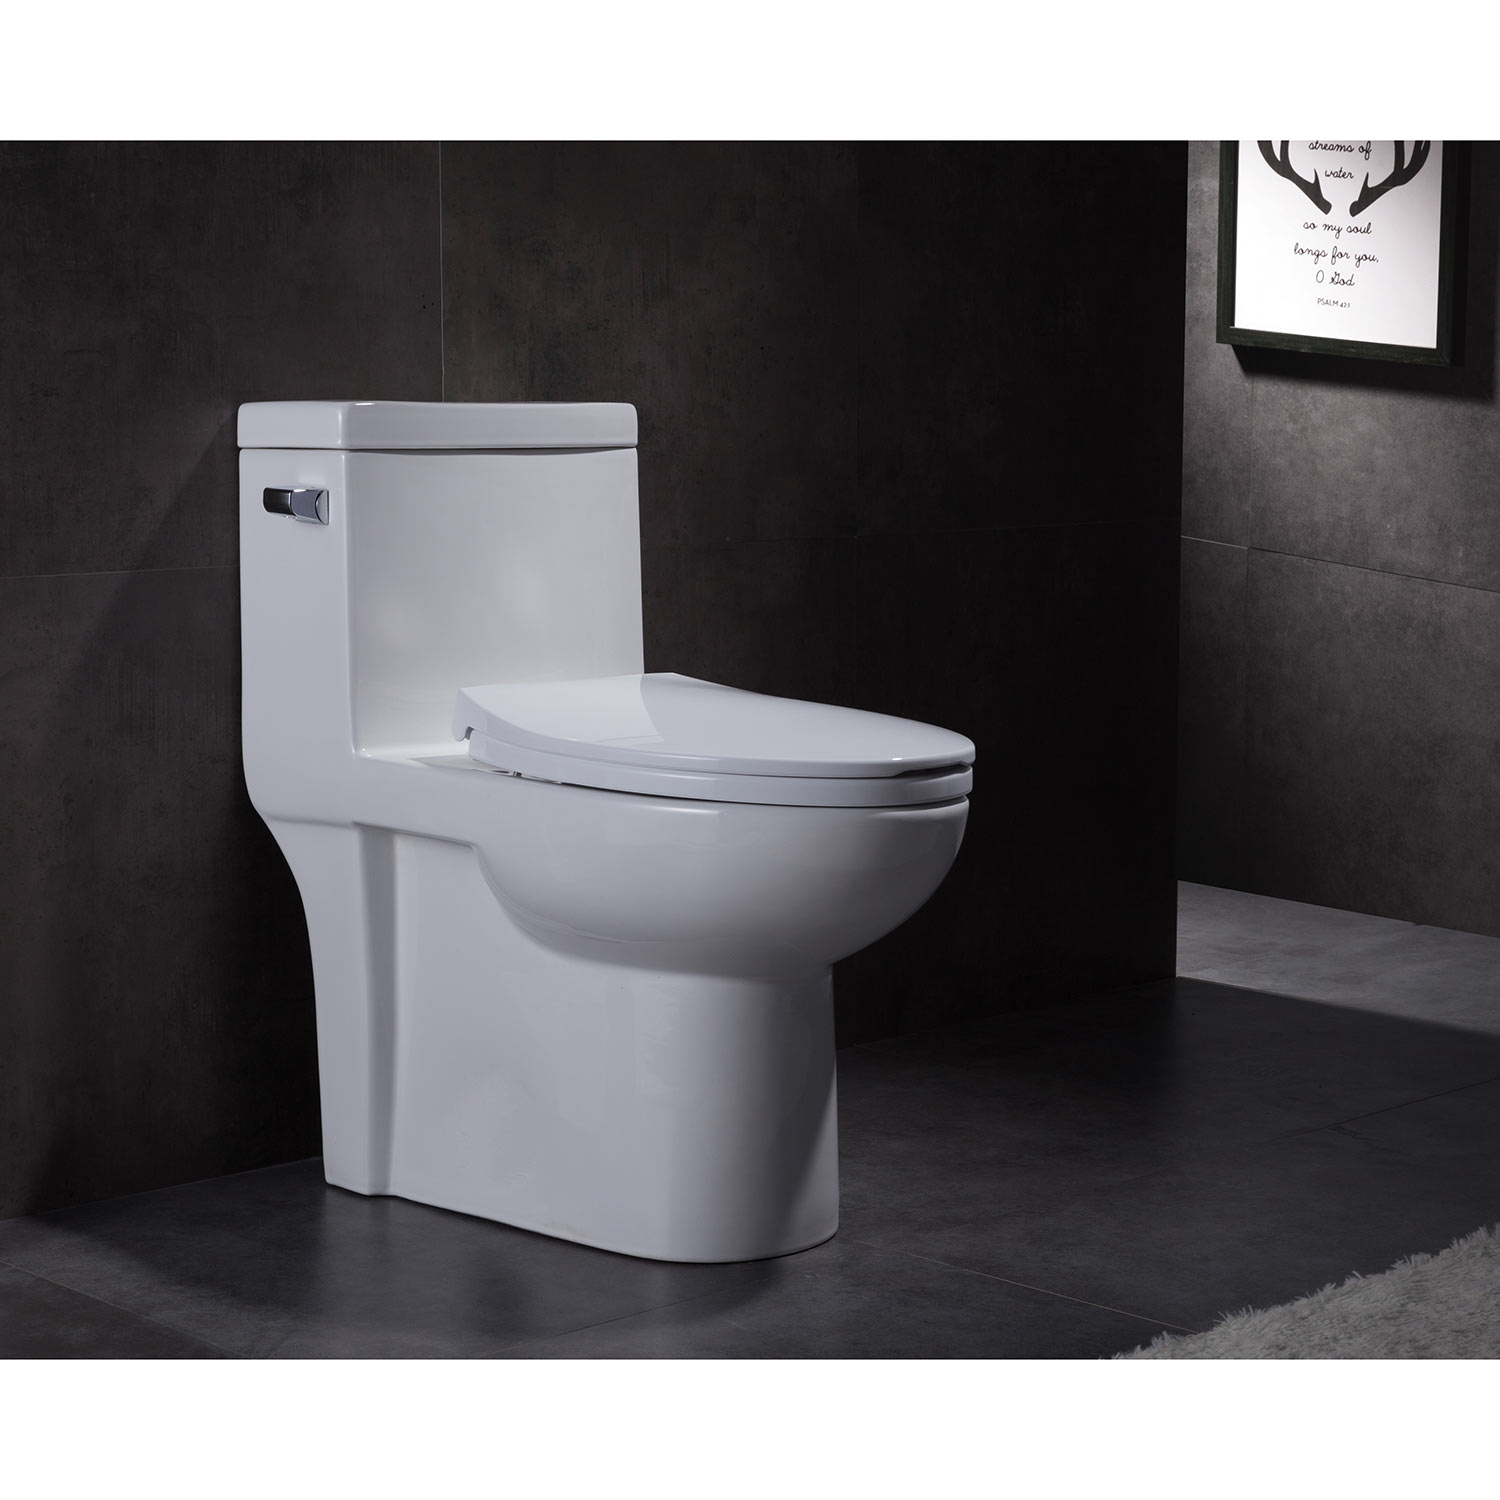 http://www.conceptbaths.com/images/detailed/17/one-piece-toilet-ov-T2181S.jpg